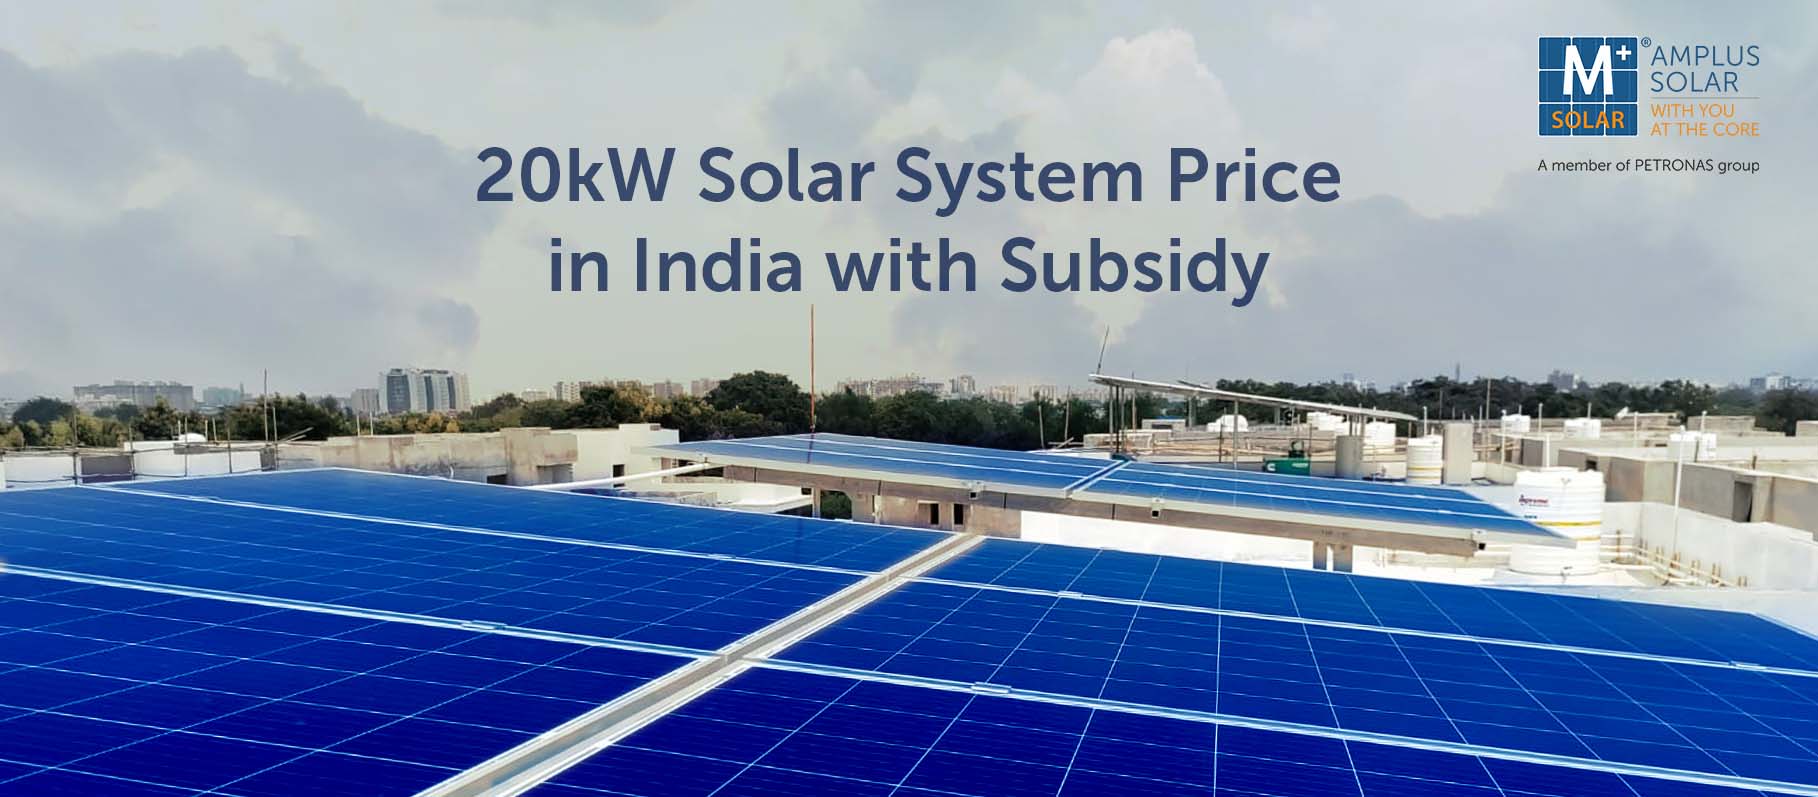 20kW Solar System Price in India with Subsidy